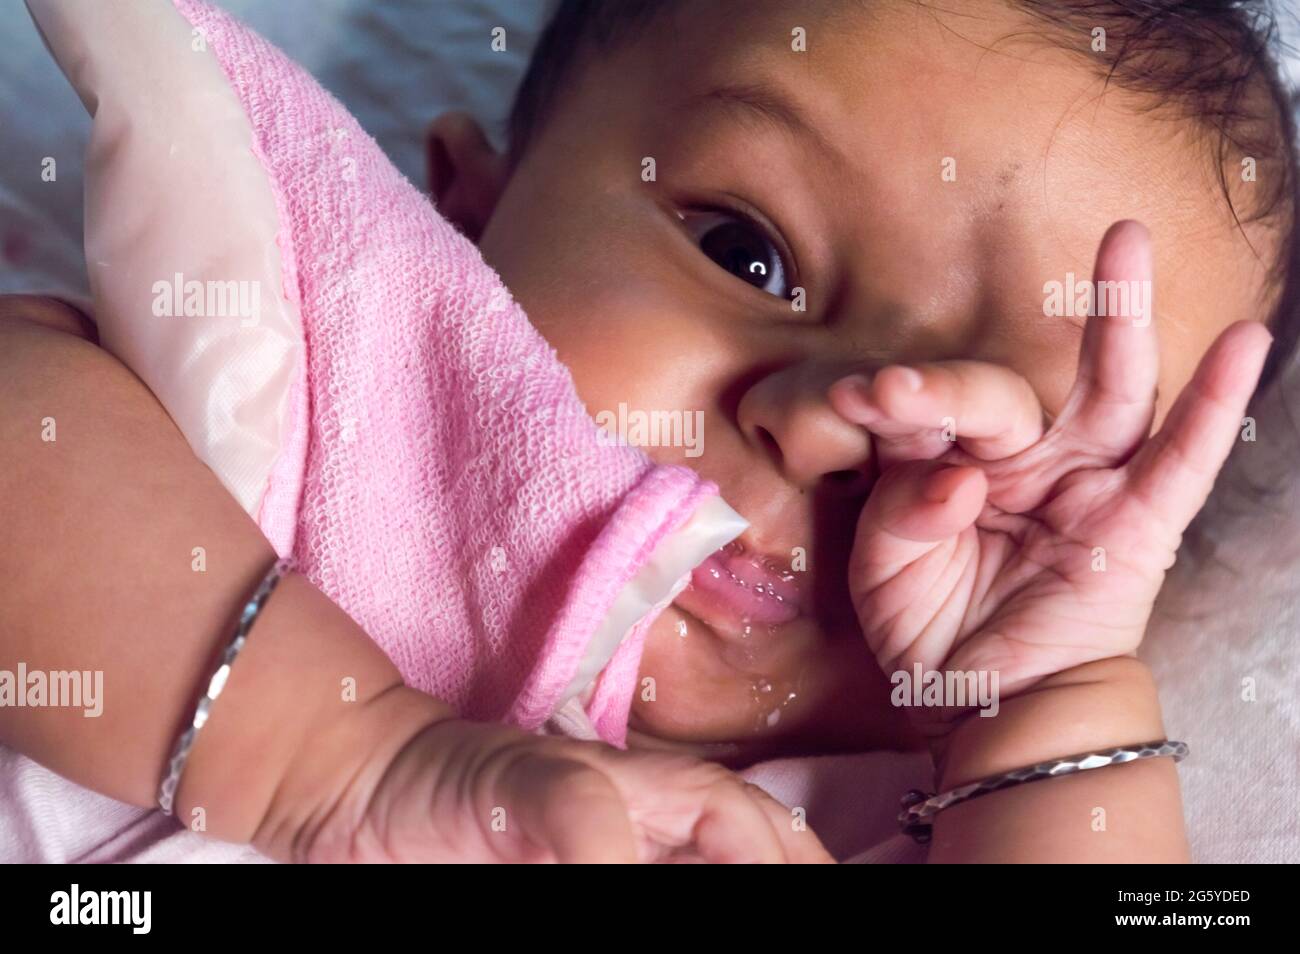 Cute baby boy wearing Baby Bib with Hands Covering Mouth while yawning in sleep and looking at camera. Sweet little infant toddler. Closeup portrait. Stock Photo